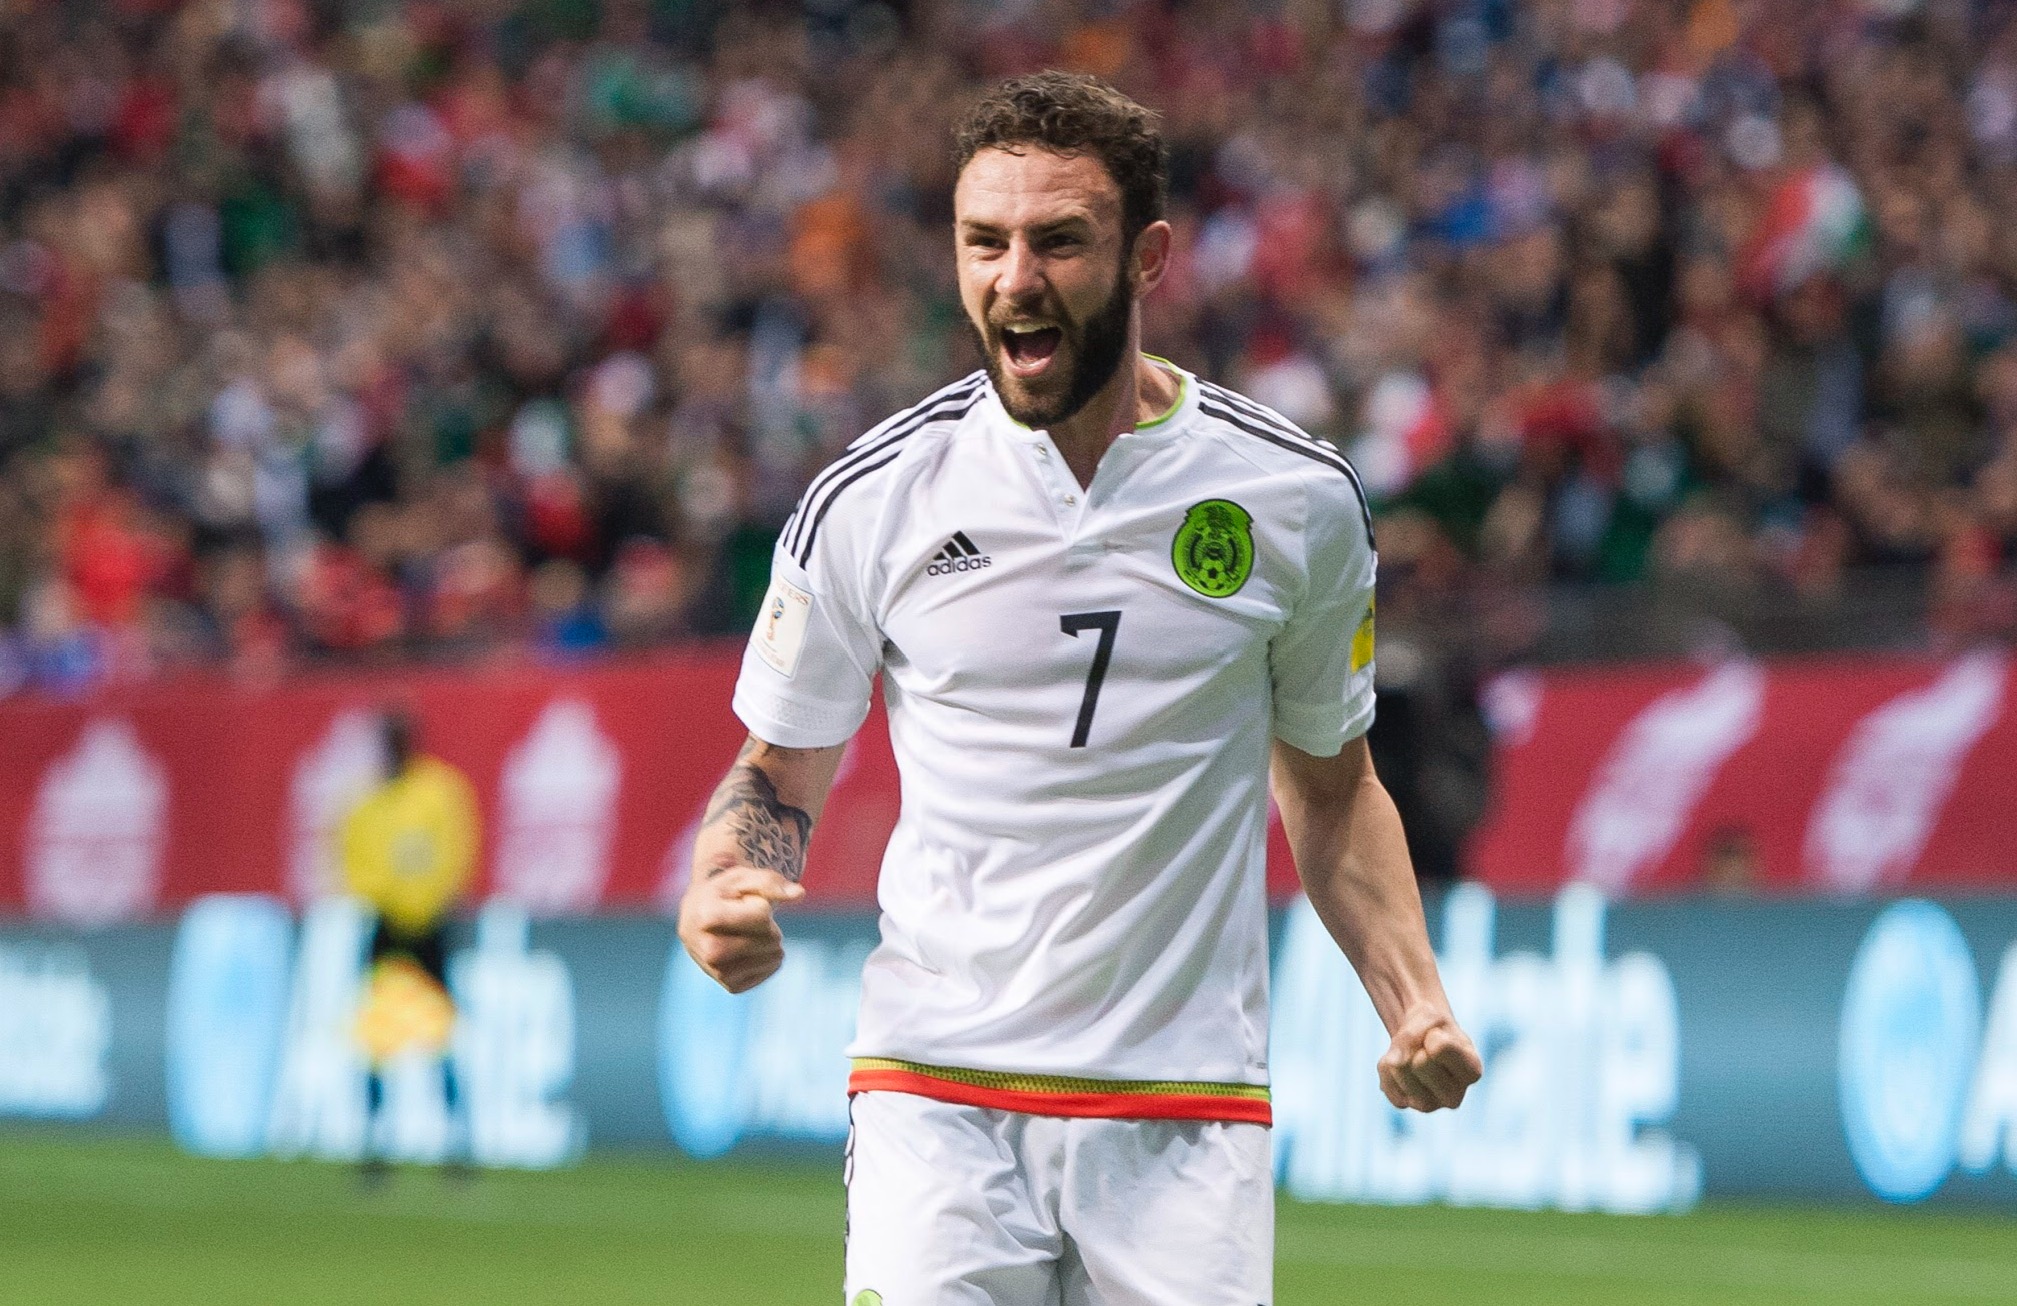 Layún named in Agencia EFE’s South American XI at the Russia World Cup